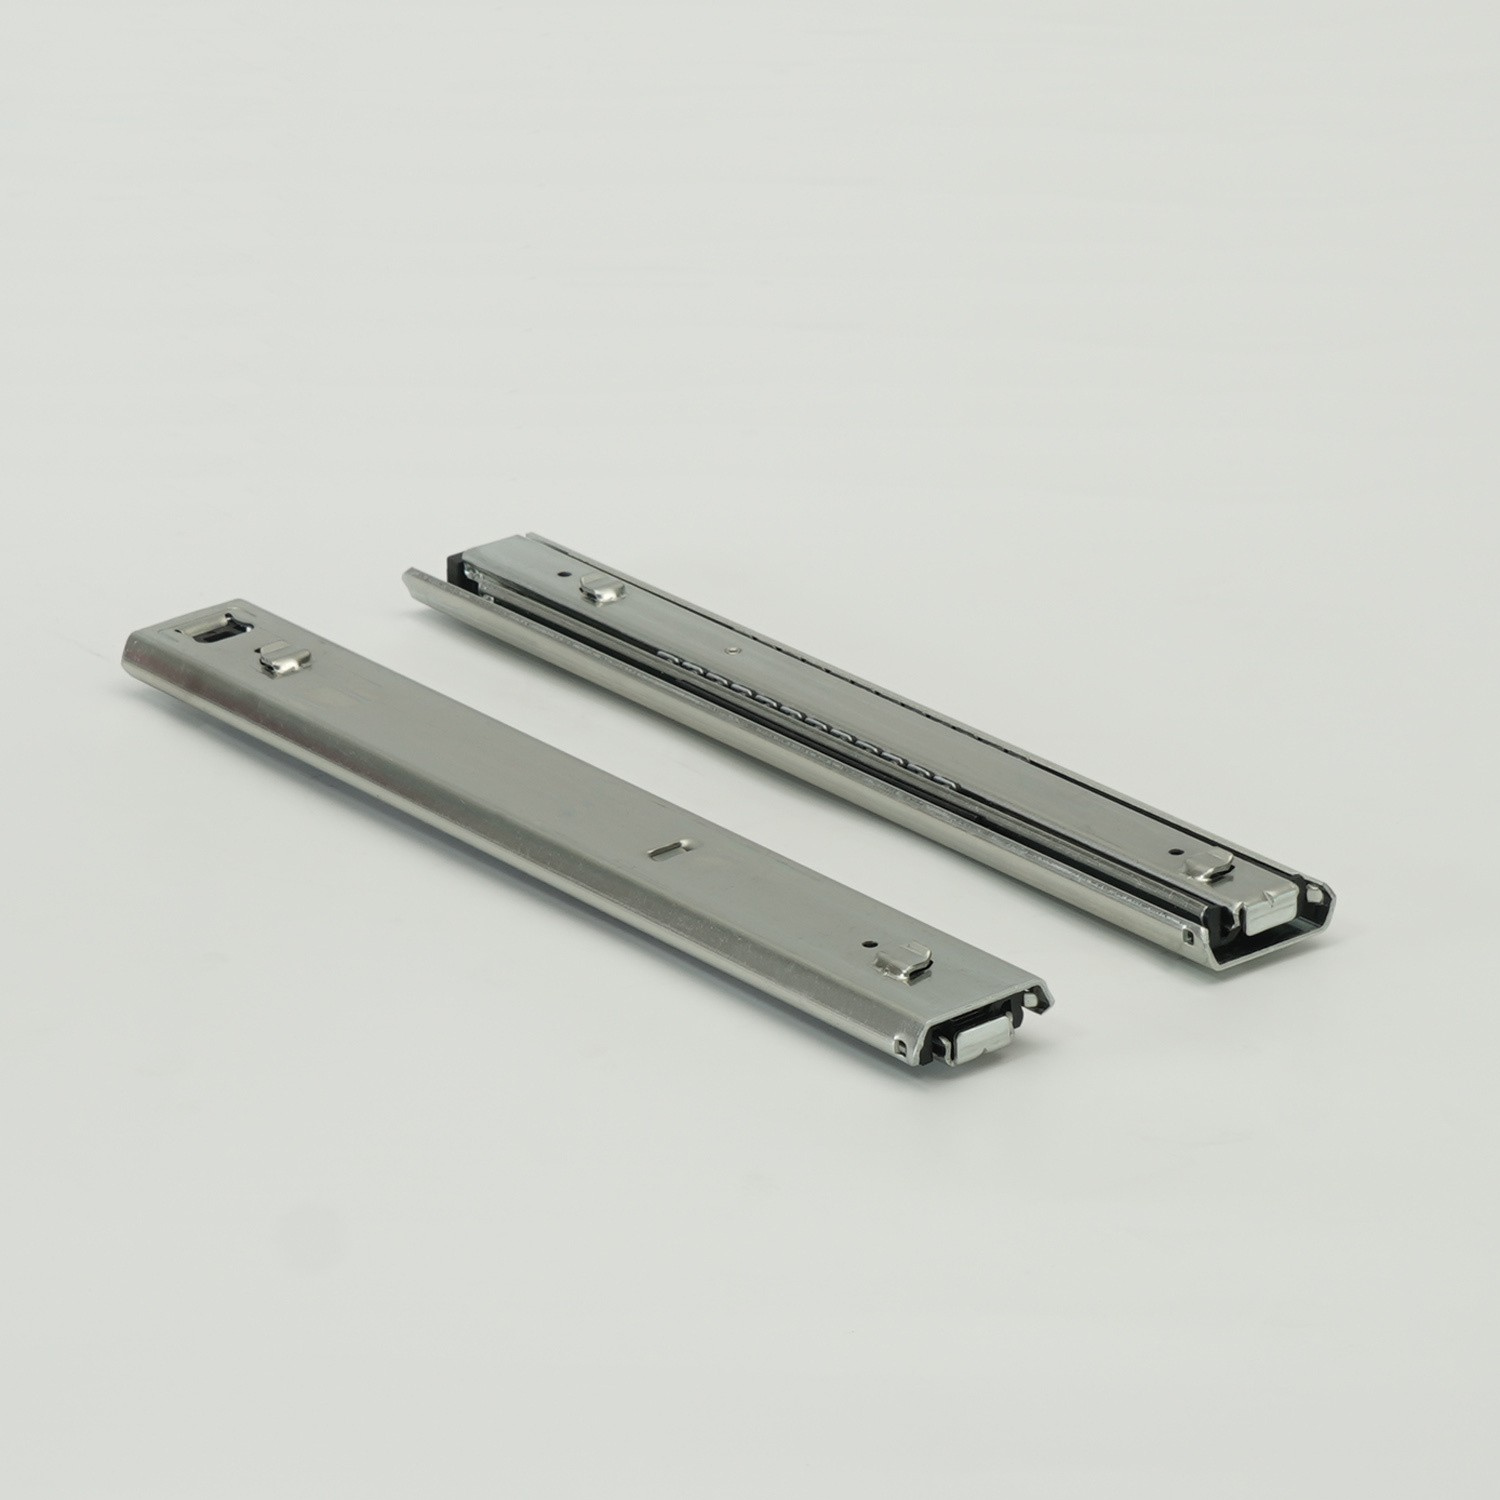 53mm Plug-in Heavy Duty Ball Bearing Drawer Slide with Hooks (bayonet joint)